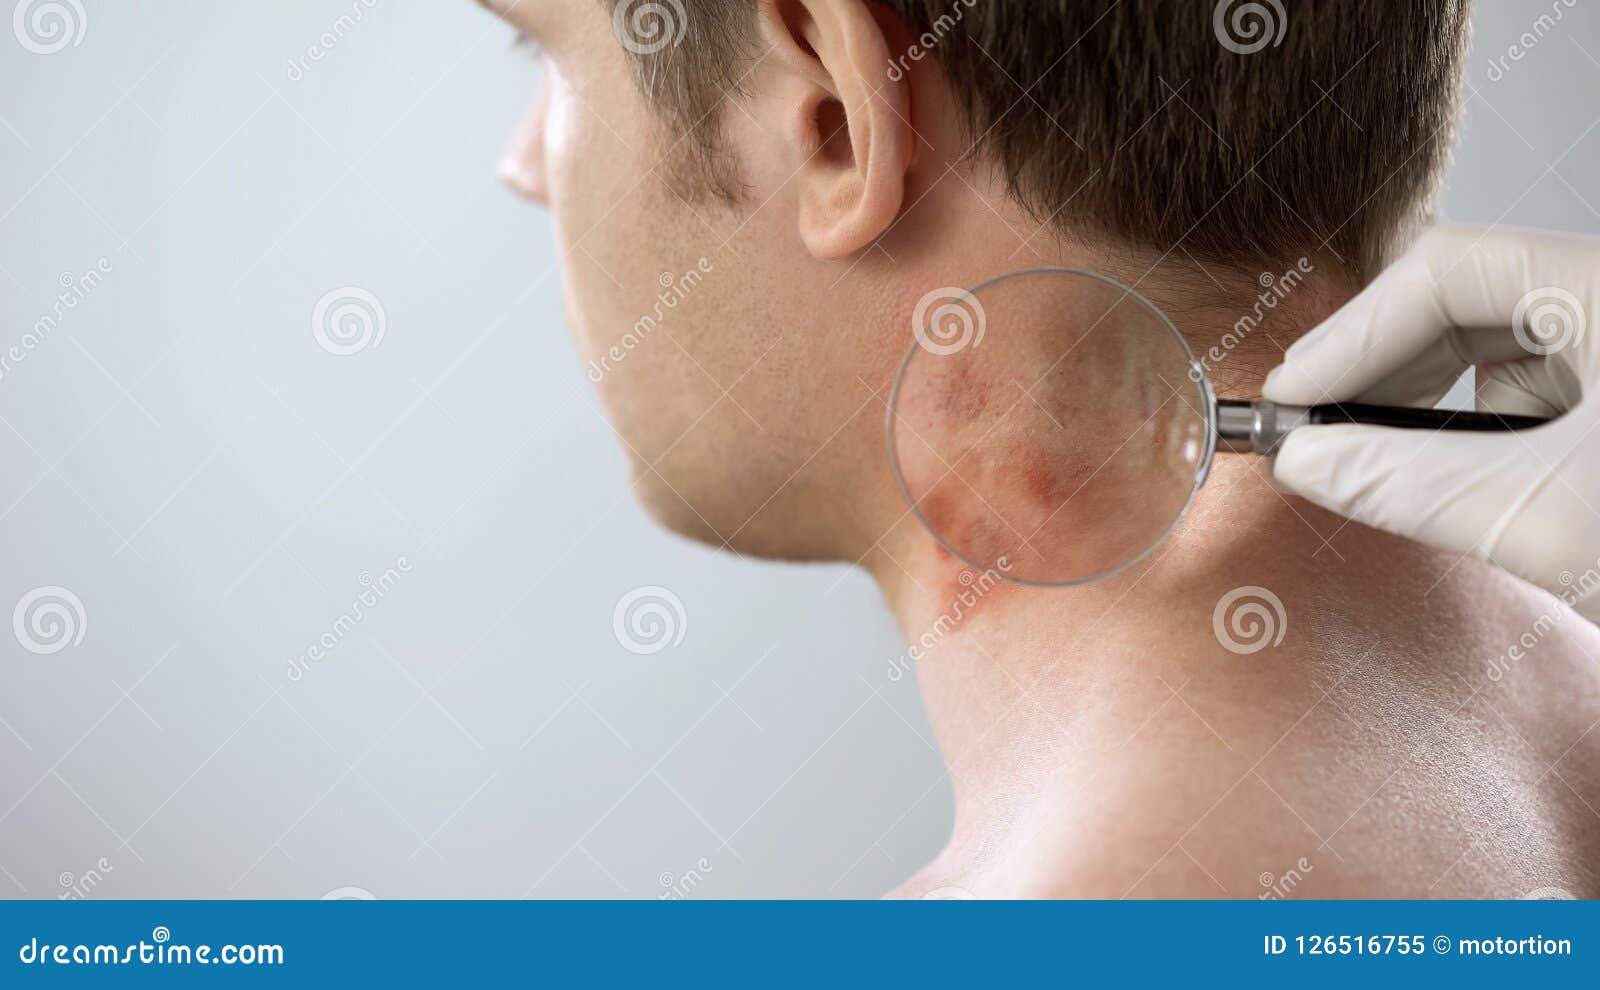 therapist examines rash on patient neck with magnifying glass, dermatology